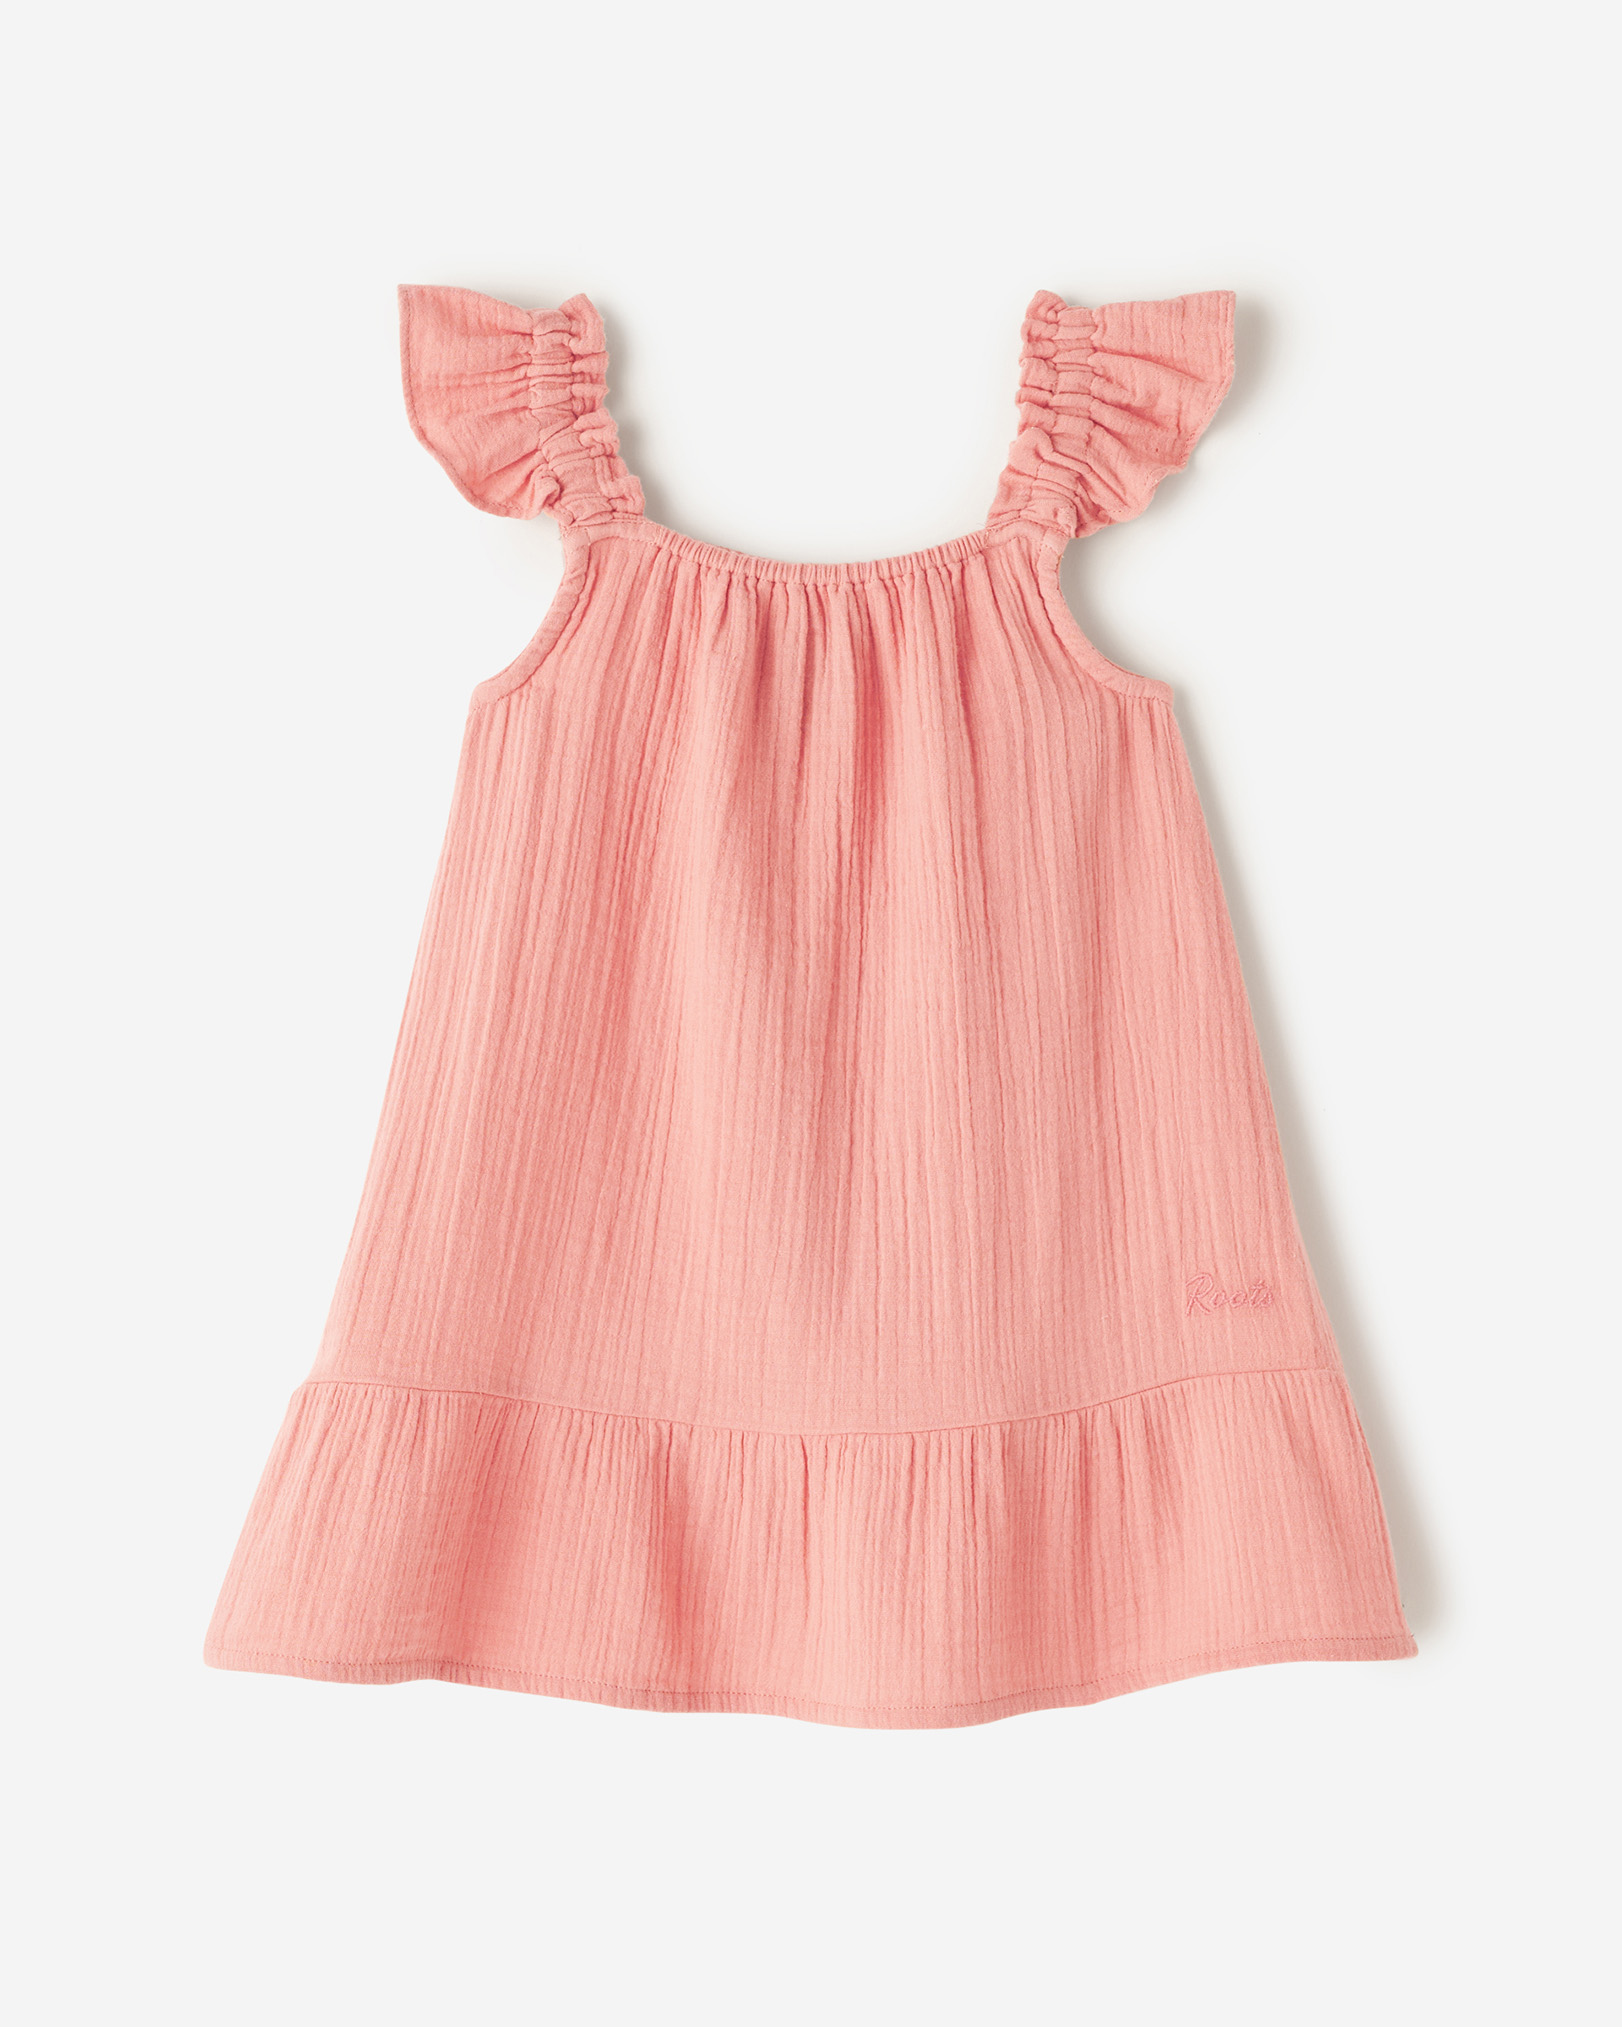 Roots Toddler Girl's Crinkle Ruffle Dress in Mauveglow